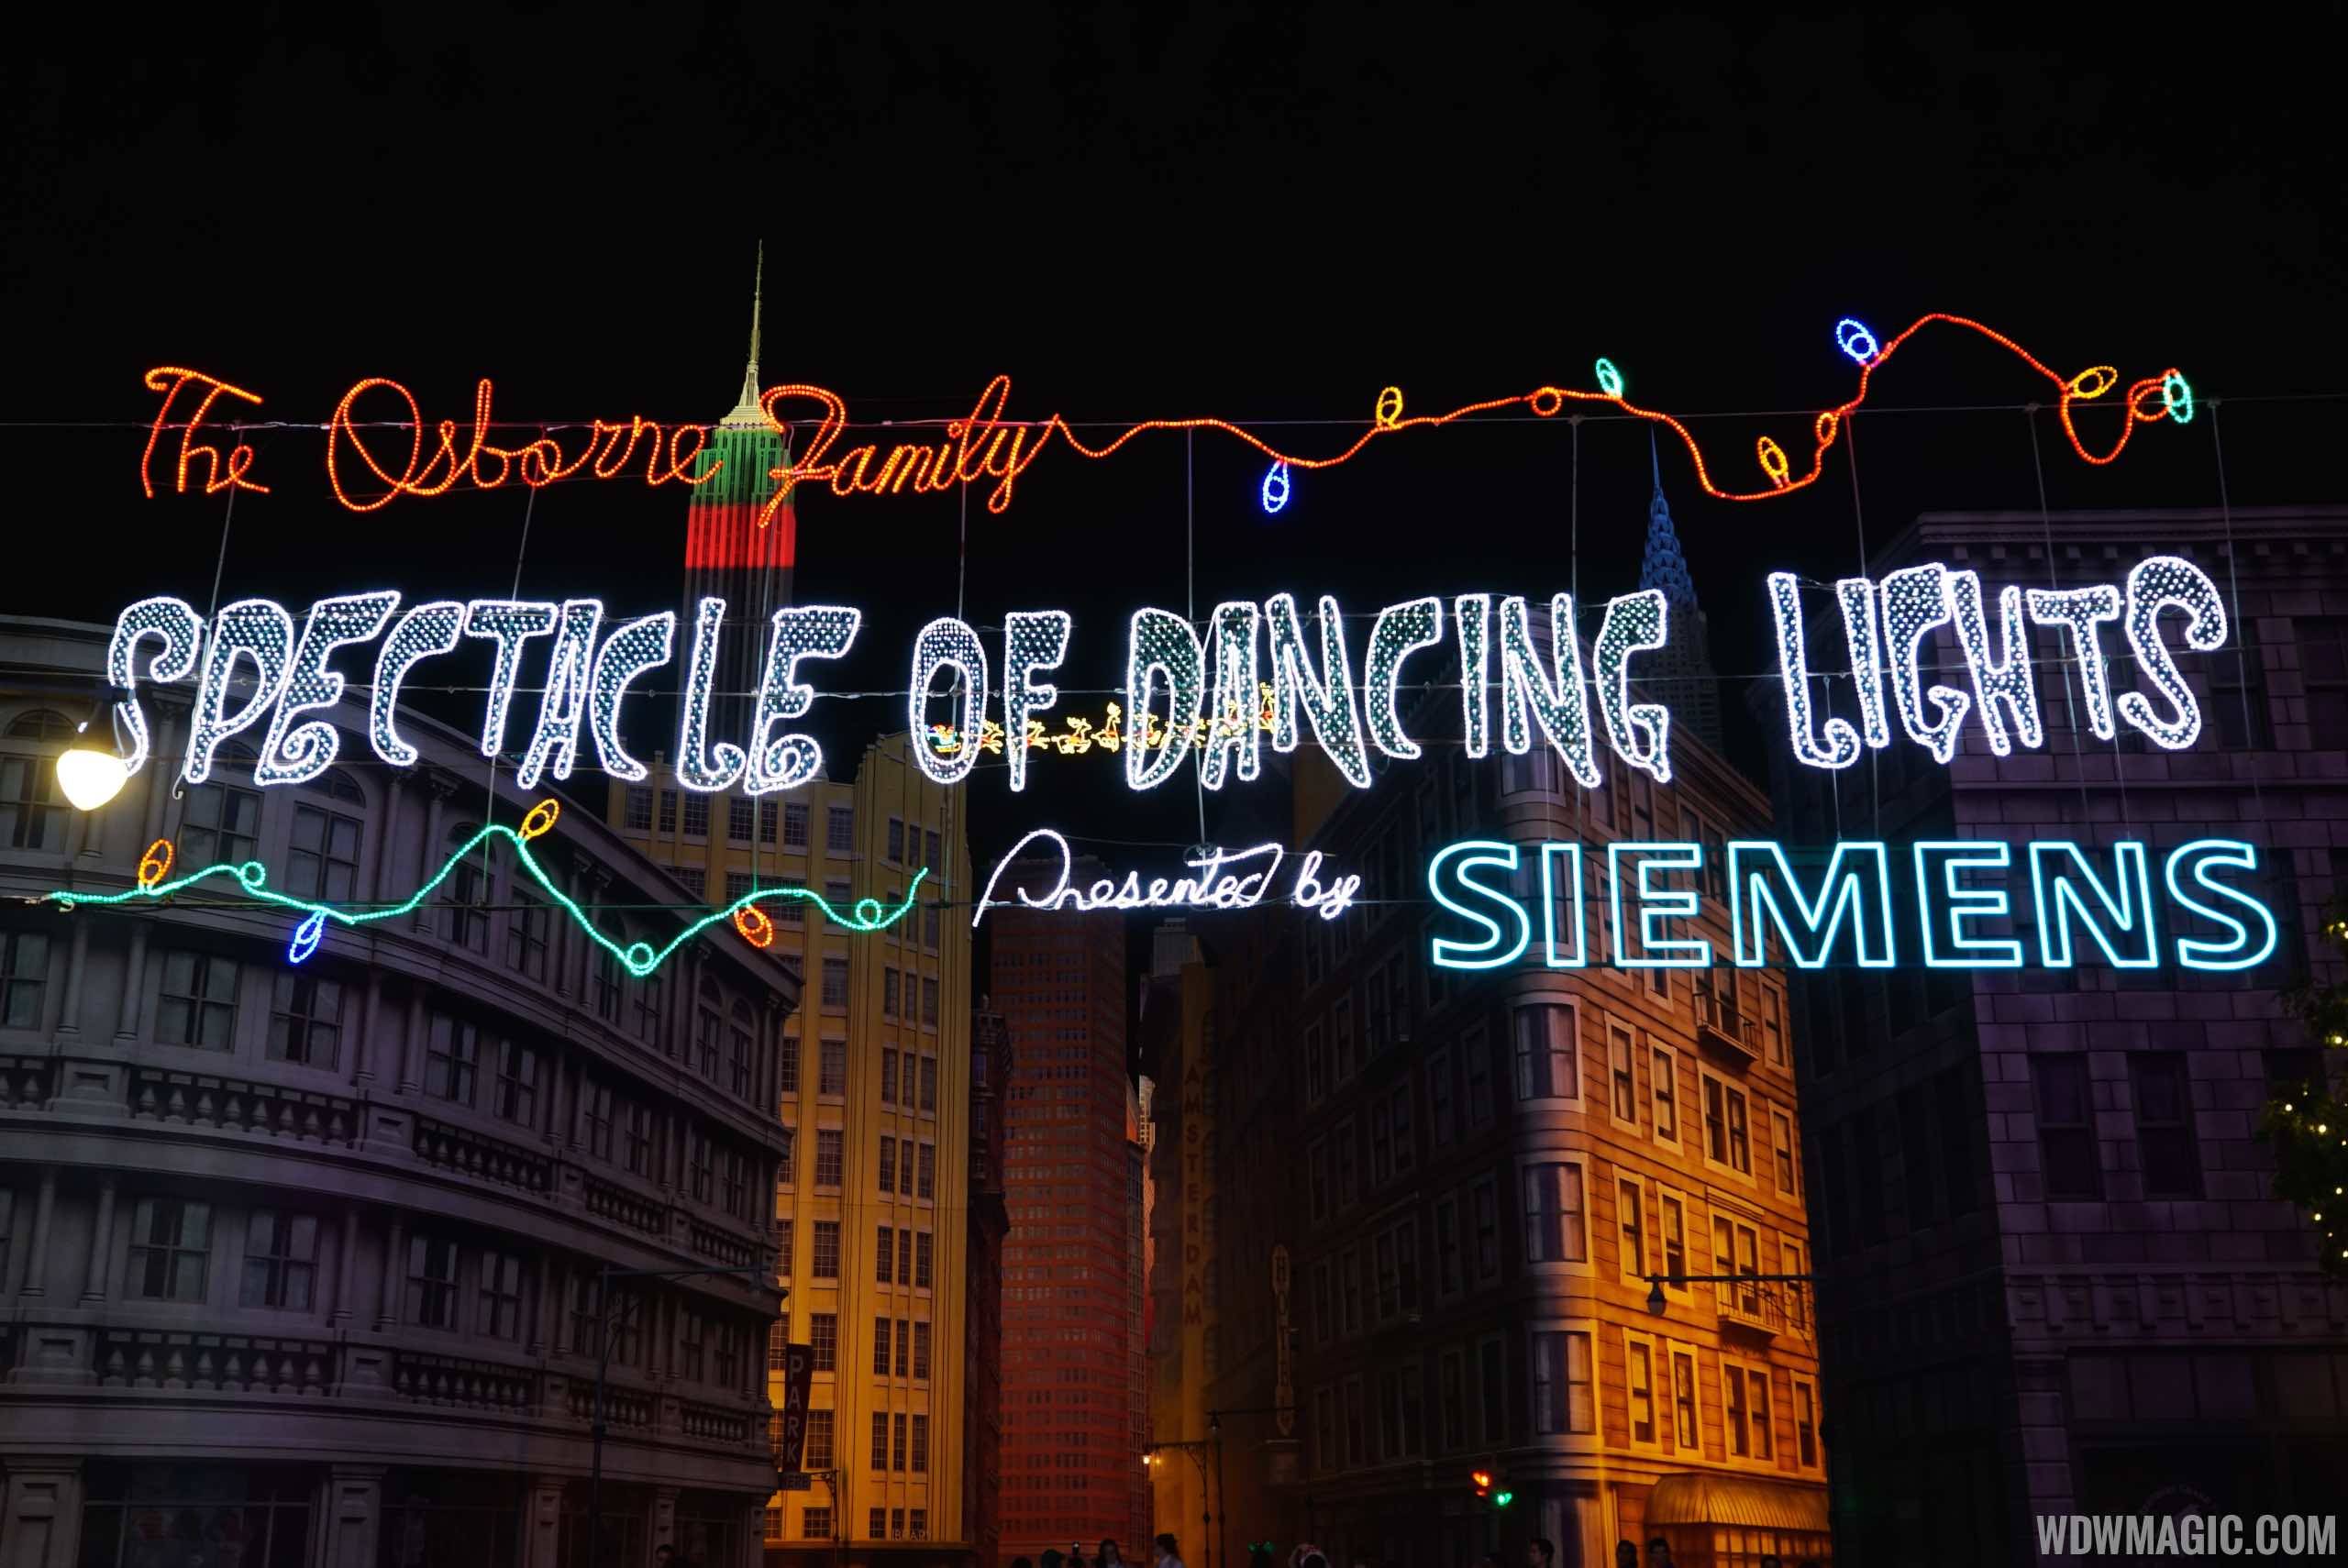 VIDEO - Osborne Family Spectacle of Dancing Lights opens with Glow with the Show ear hats